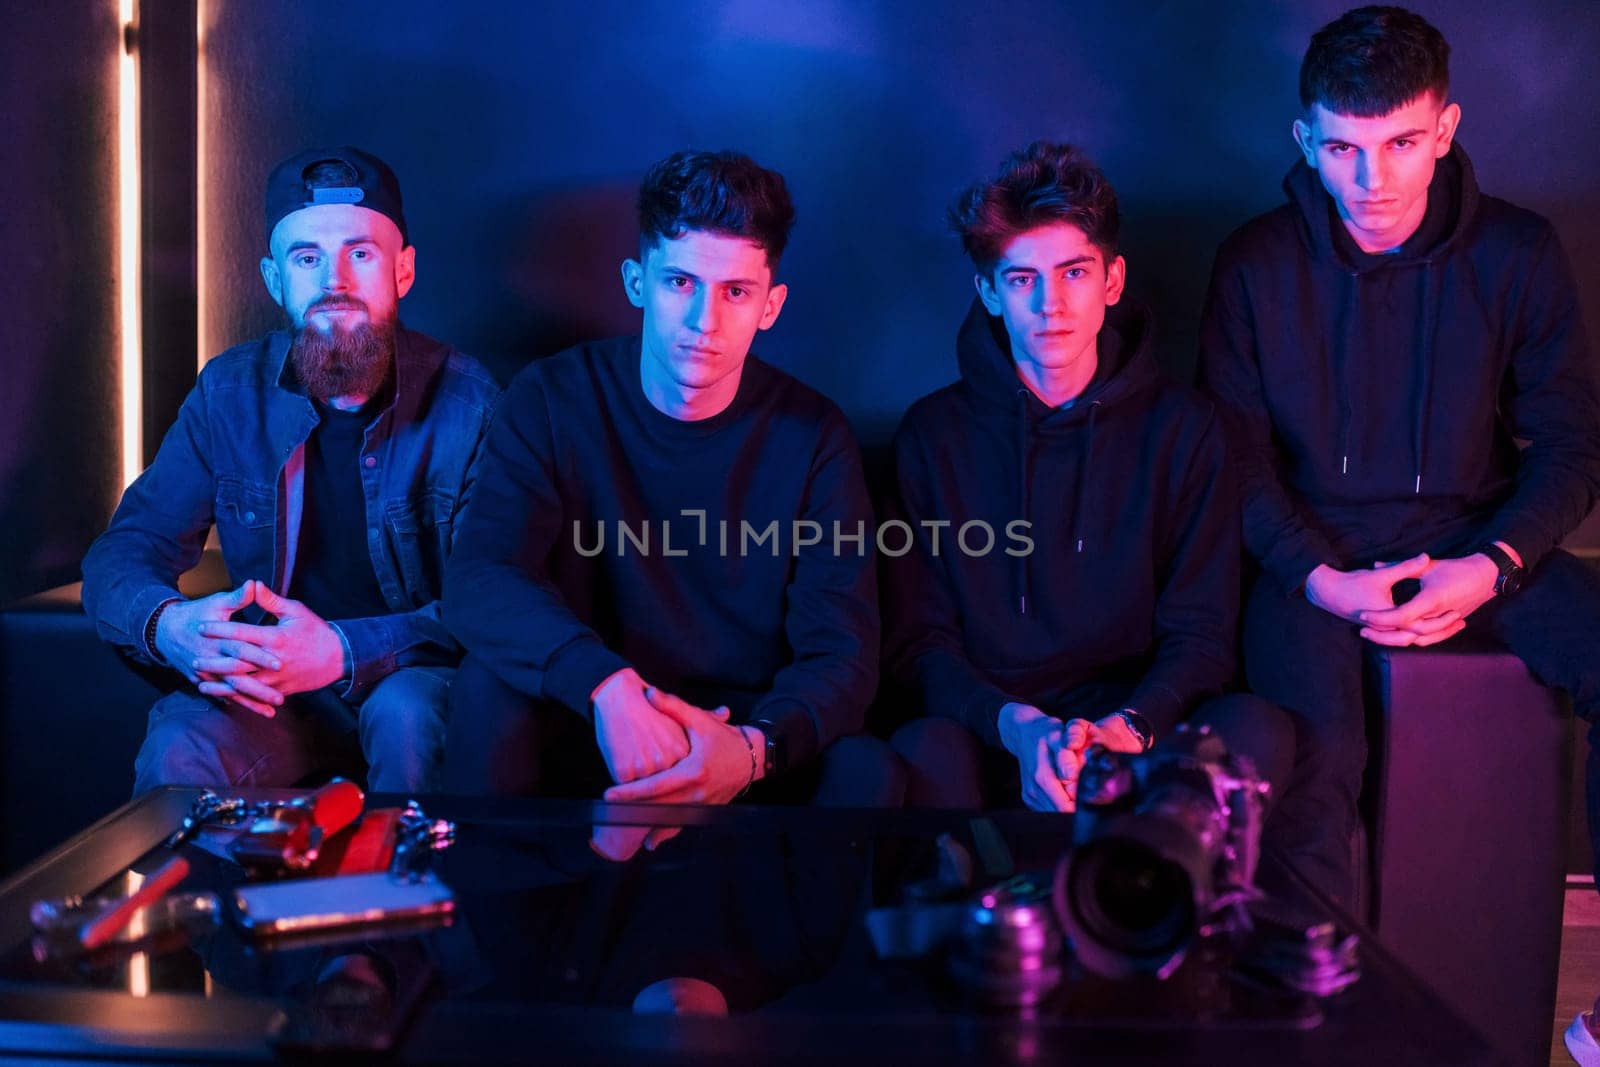 Group of people is together in the studio with futuristic neon lighting.